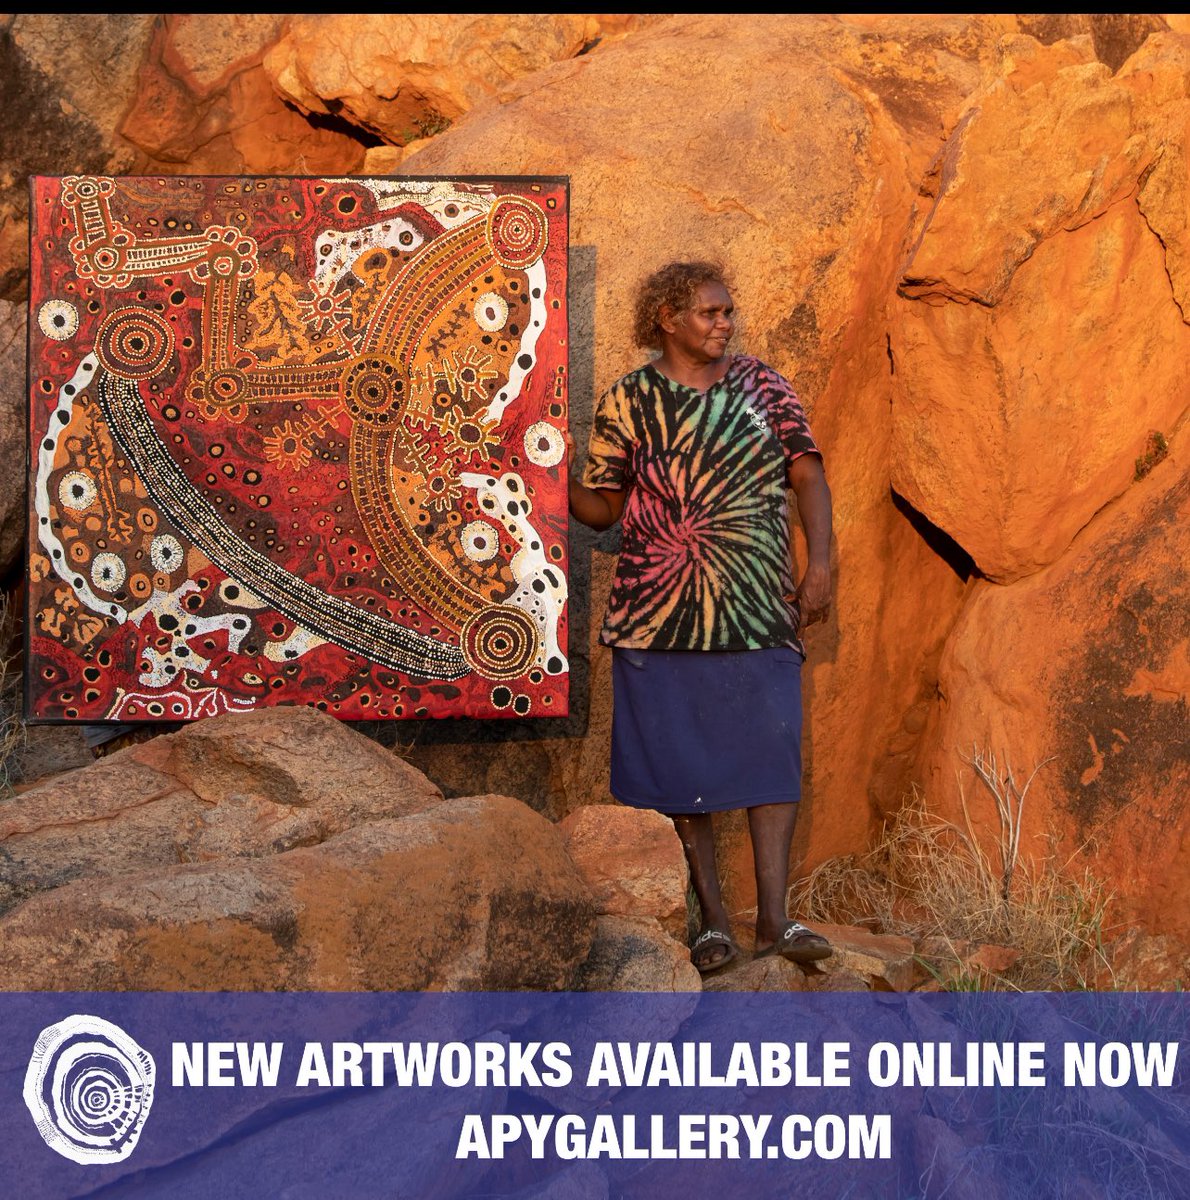 Don’t miss the extraordinary selection of new works from our member artists and art centres throughout the APY Lands, Coober Pedy, Port Augusta and Adelaide online now at APY Gallery. Go to apygallery.com ❤️❤️❤️